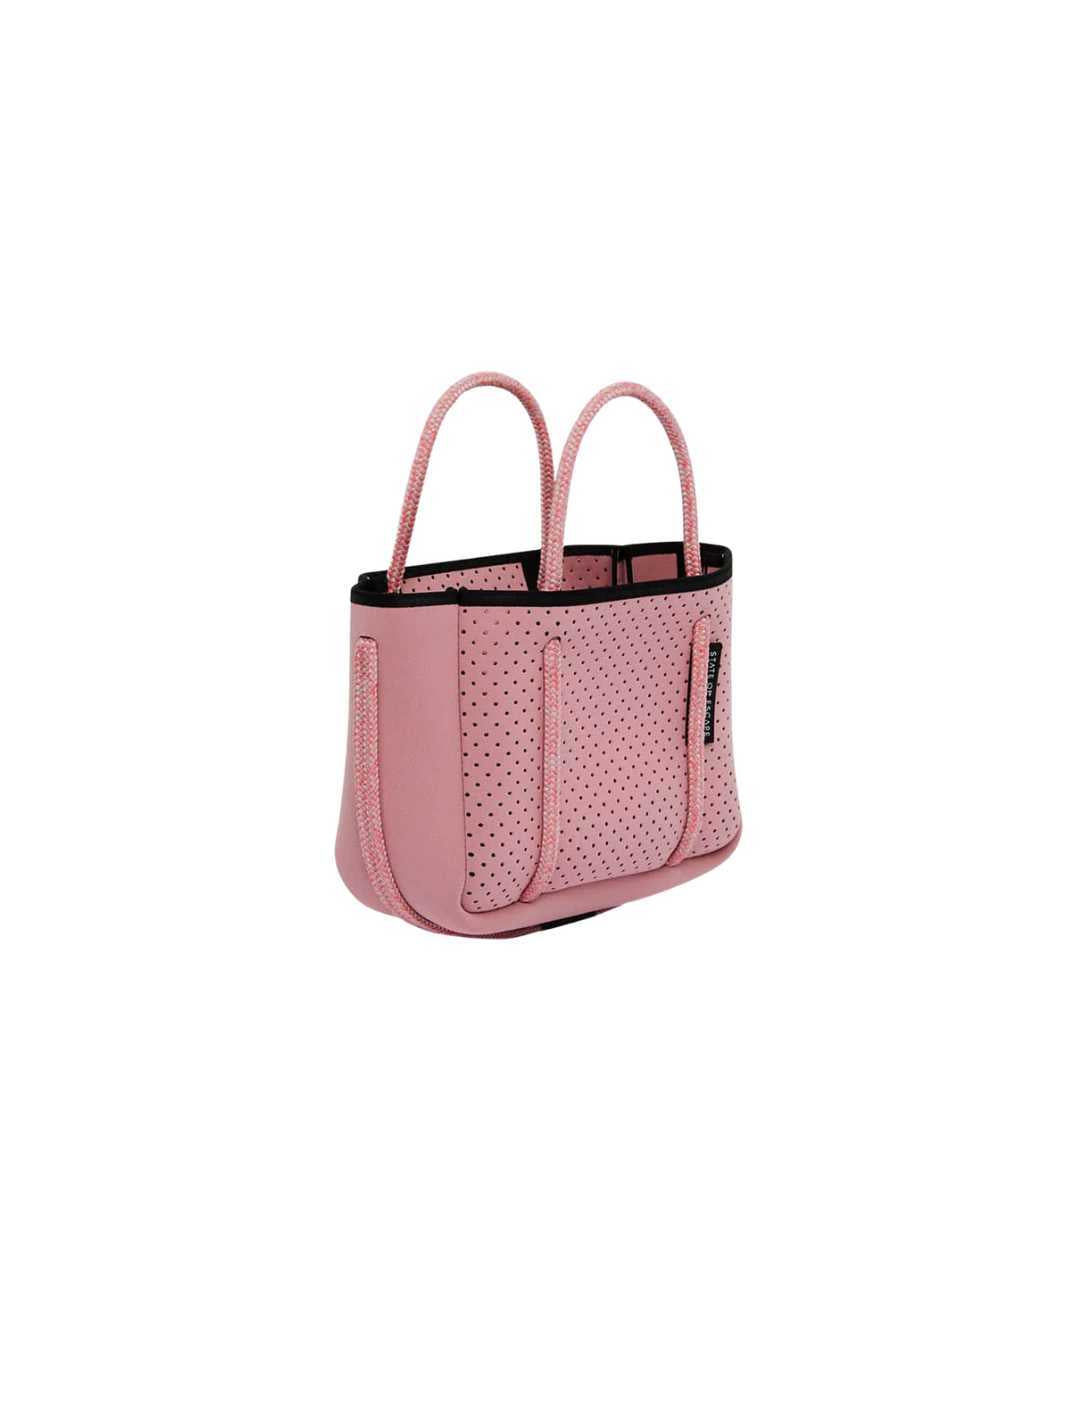 State of Escape Bags Tote Bag | Micro Dusty Pink